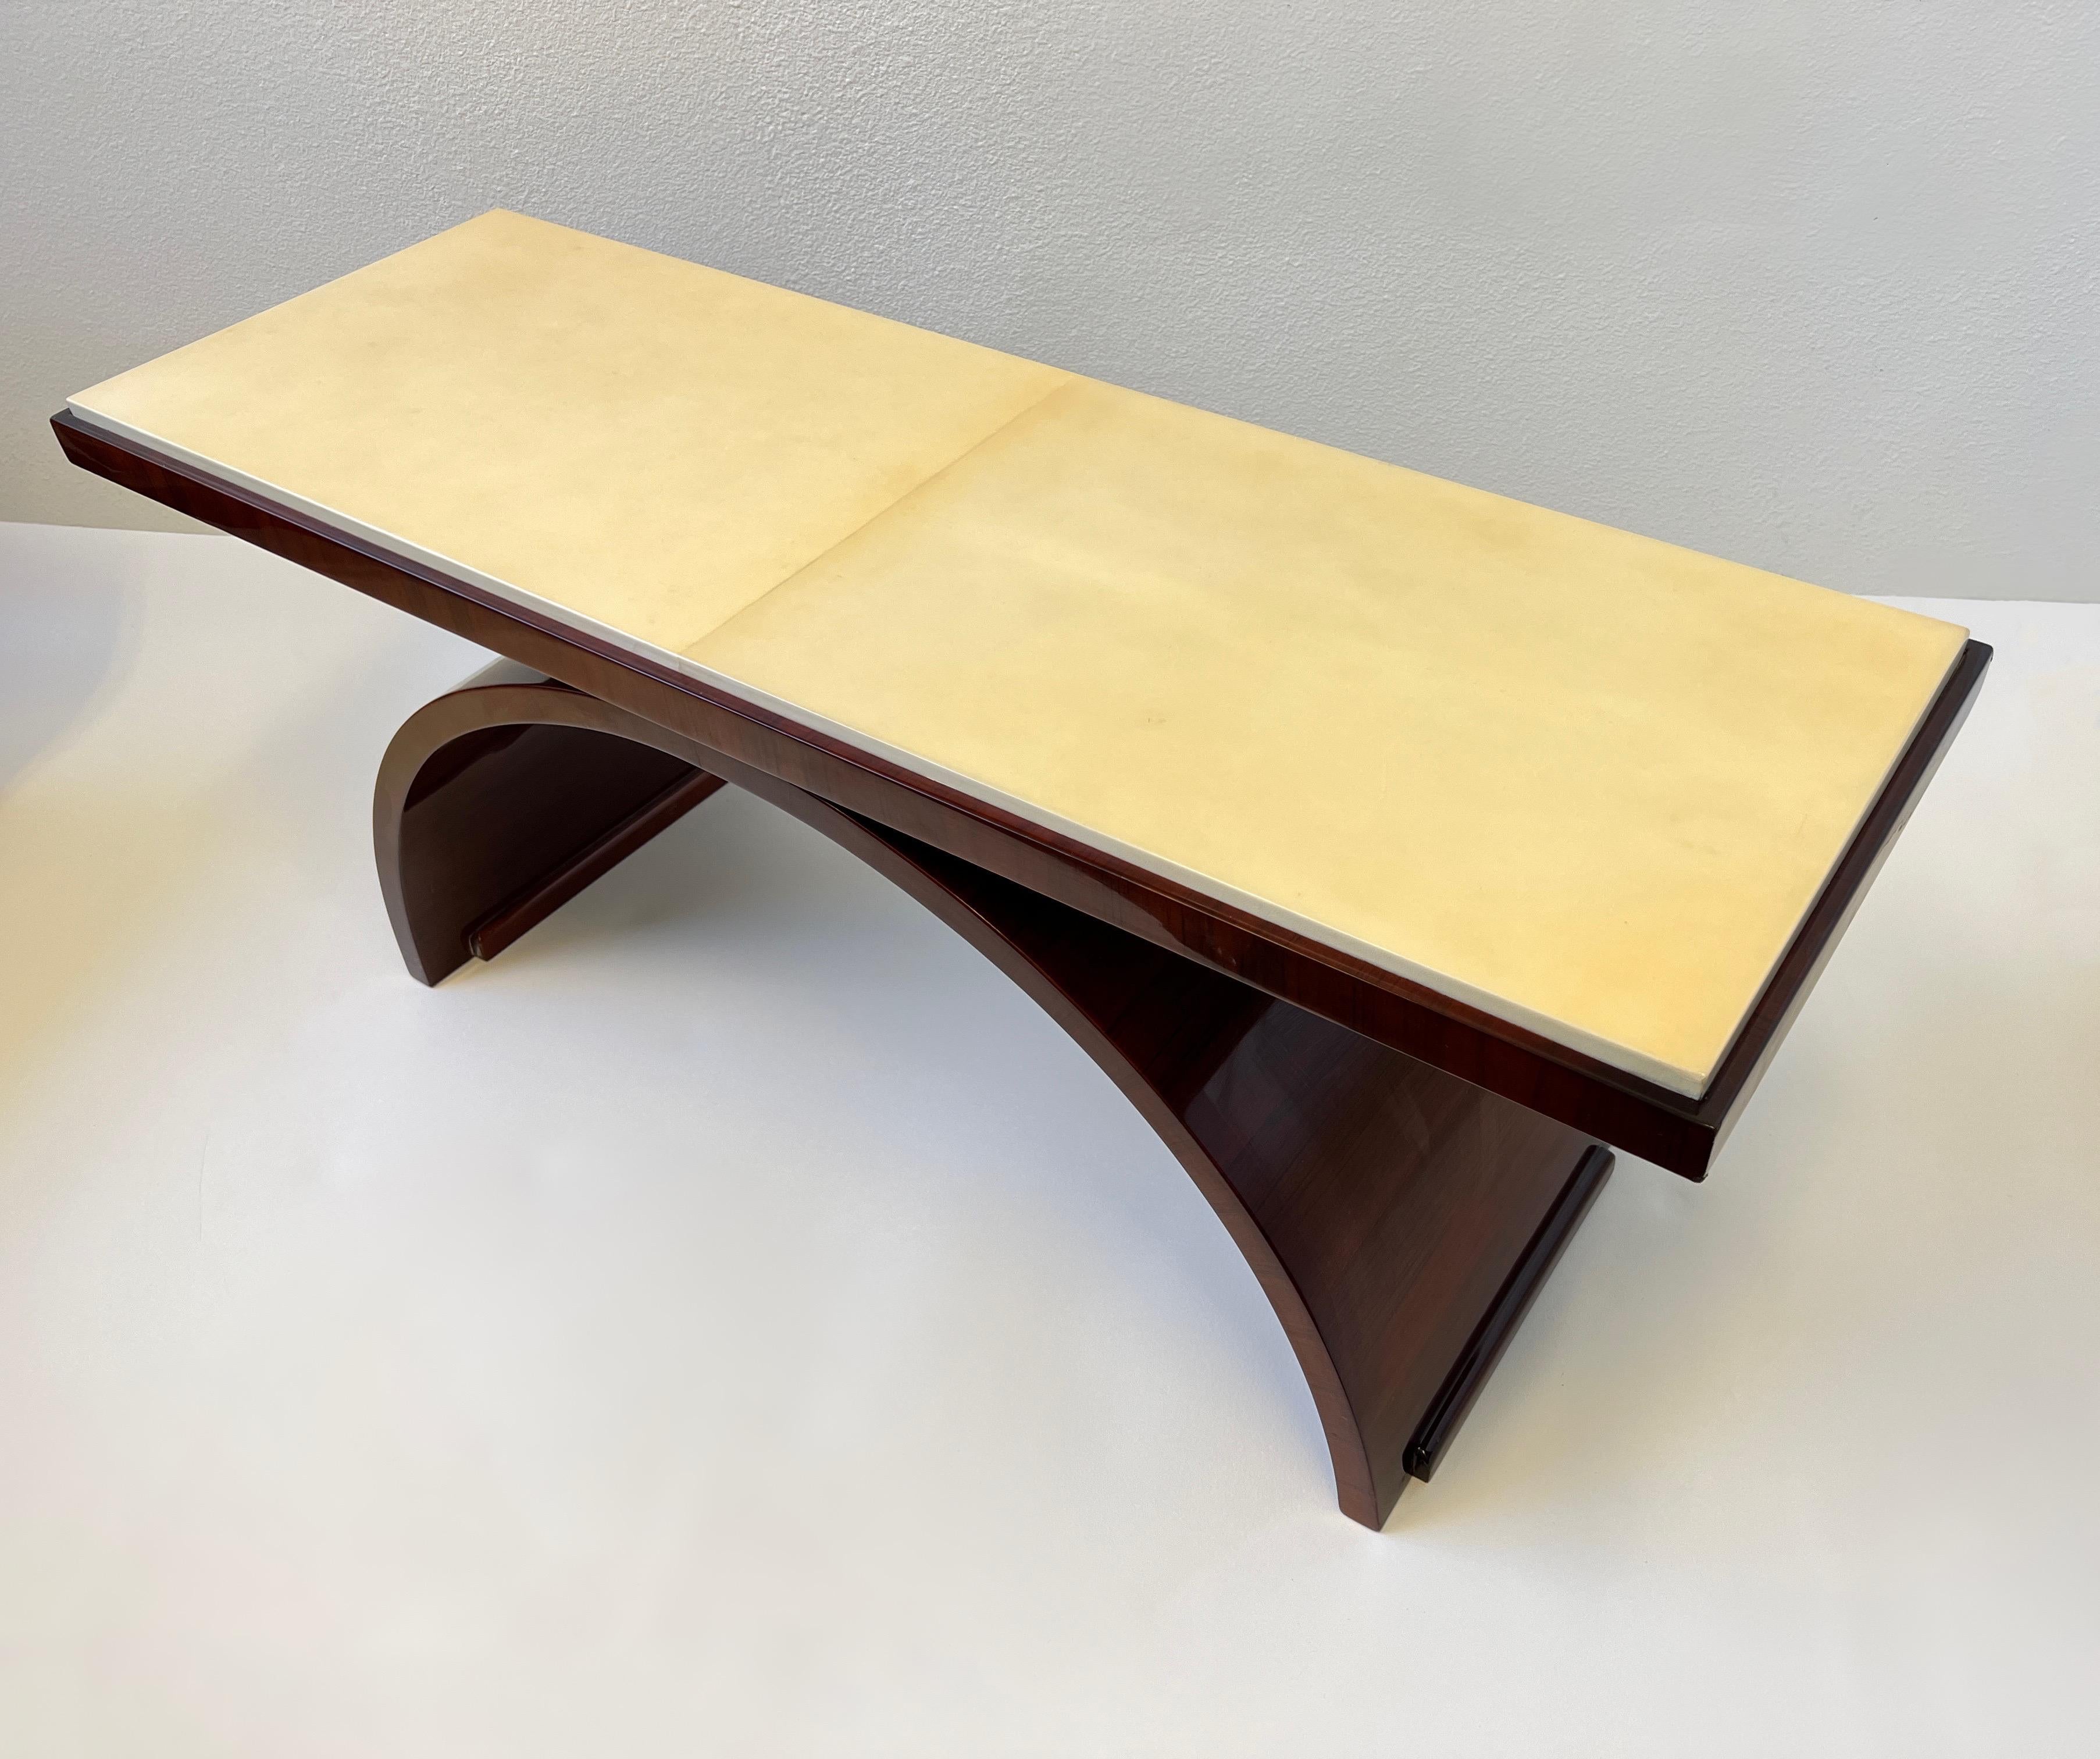 A beautiful Italian rosewood and Goatskin parchment paper Art Deco Coffee Table.
Constructed of rosewood veneer with a goatskin parchment paper top and finish with a thick clear lacquered.
Not sure if the lacquer was refinish, we had it